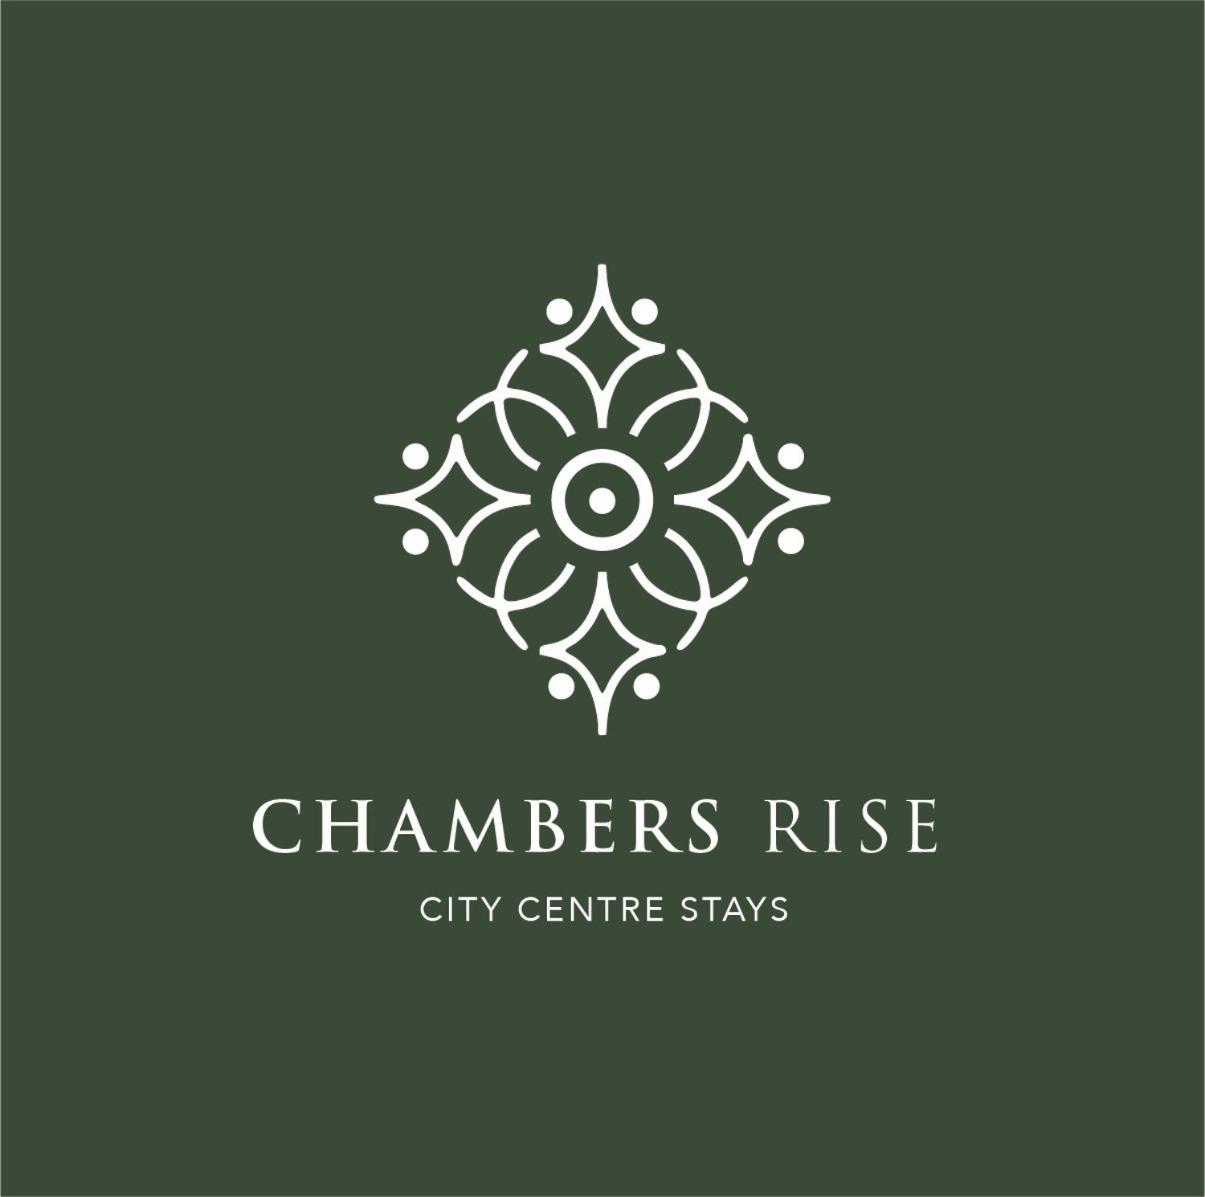 CHAMBERS RISE - City Centre Stays